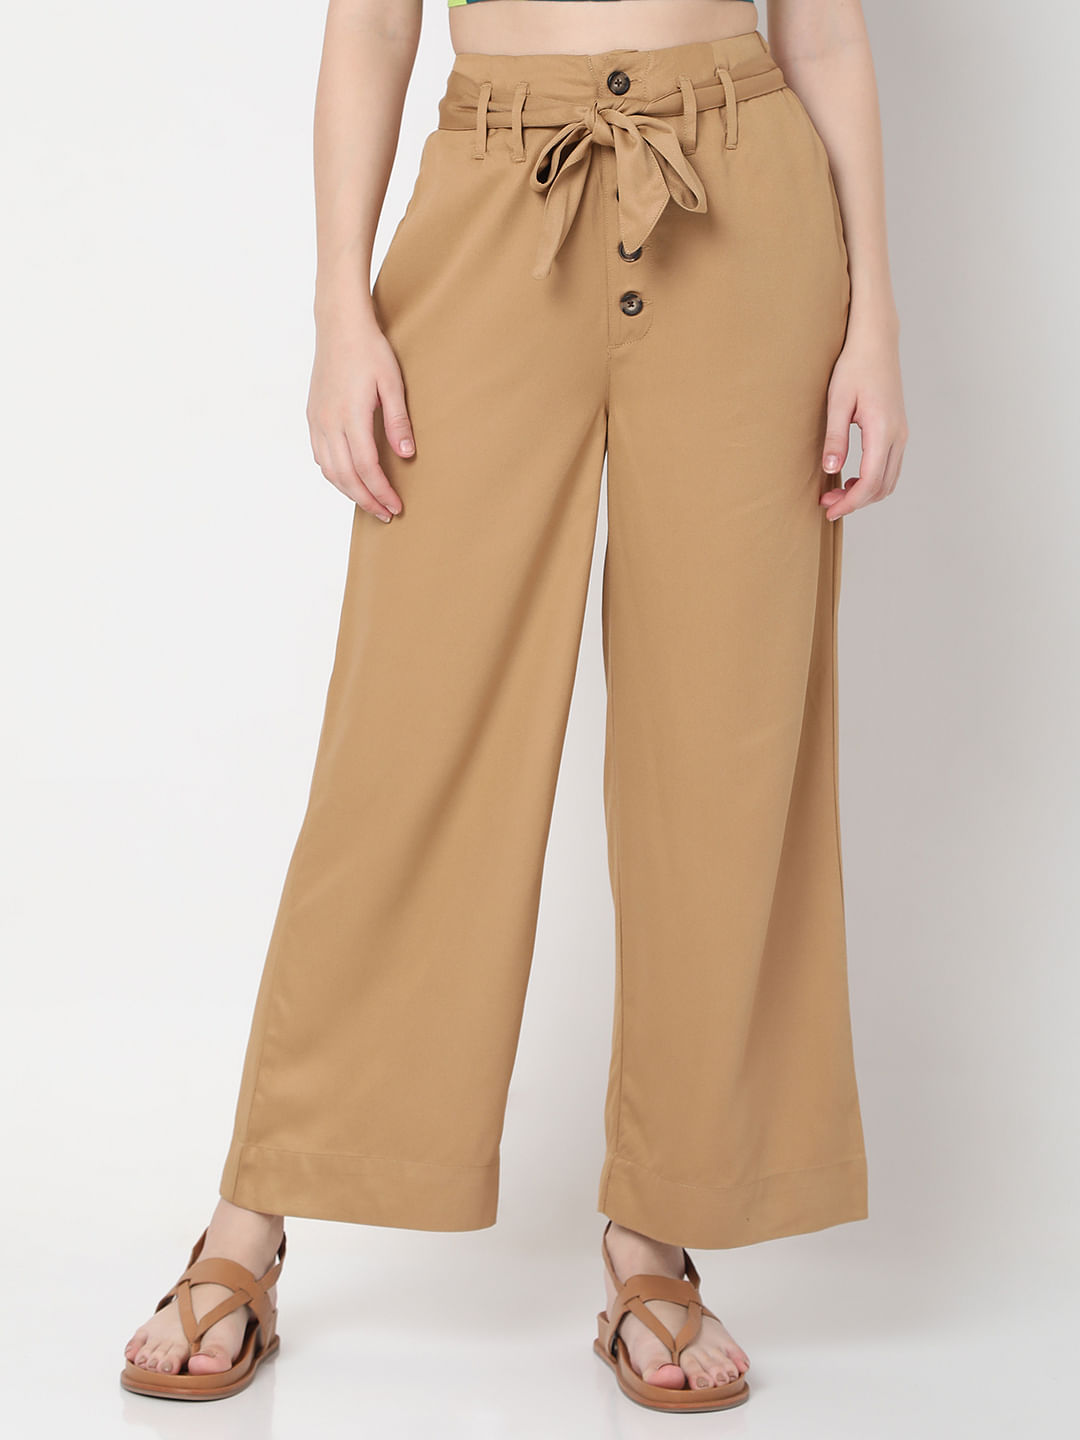 TENDER PERSON / STRAP FRARE PANTS-